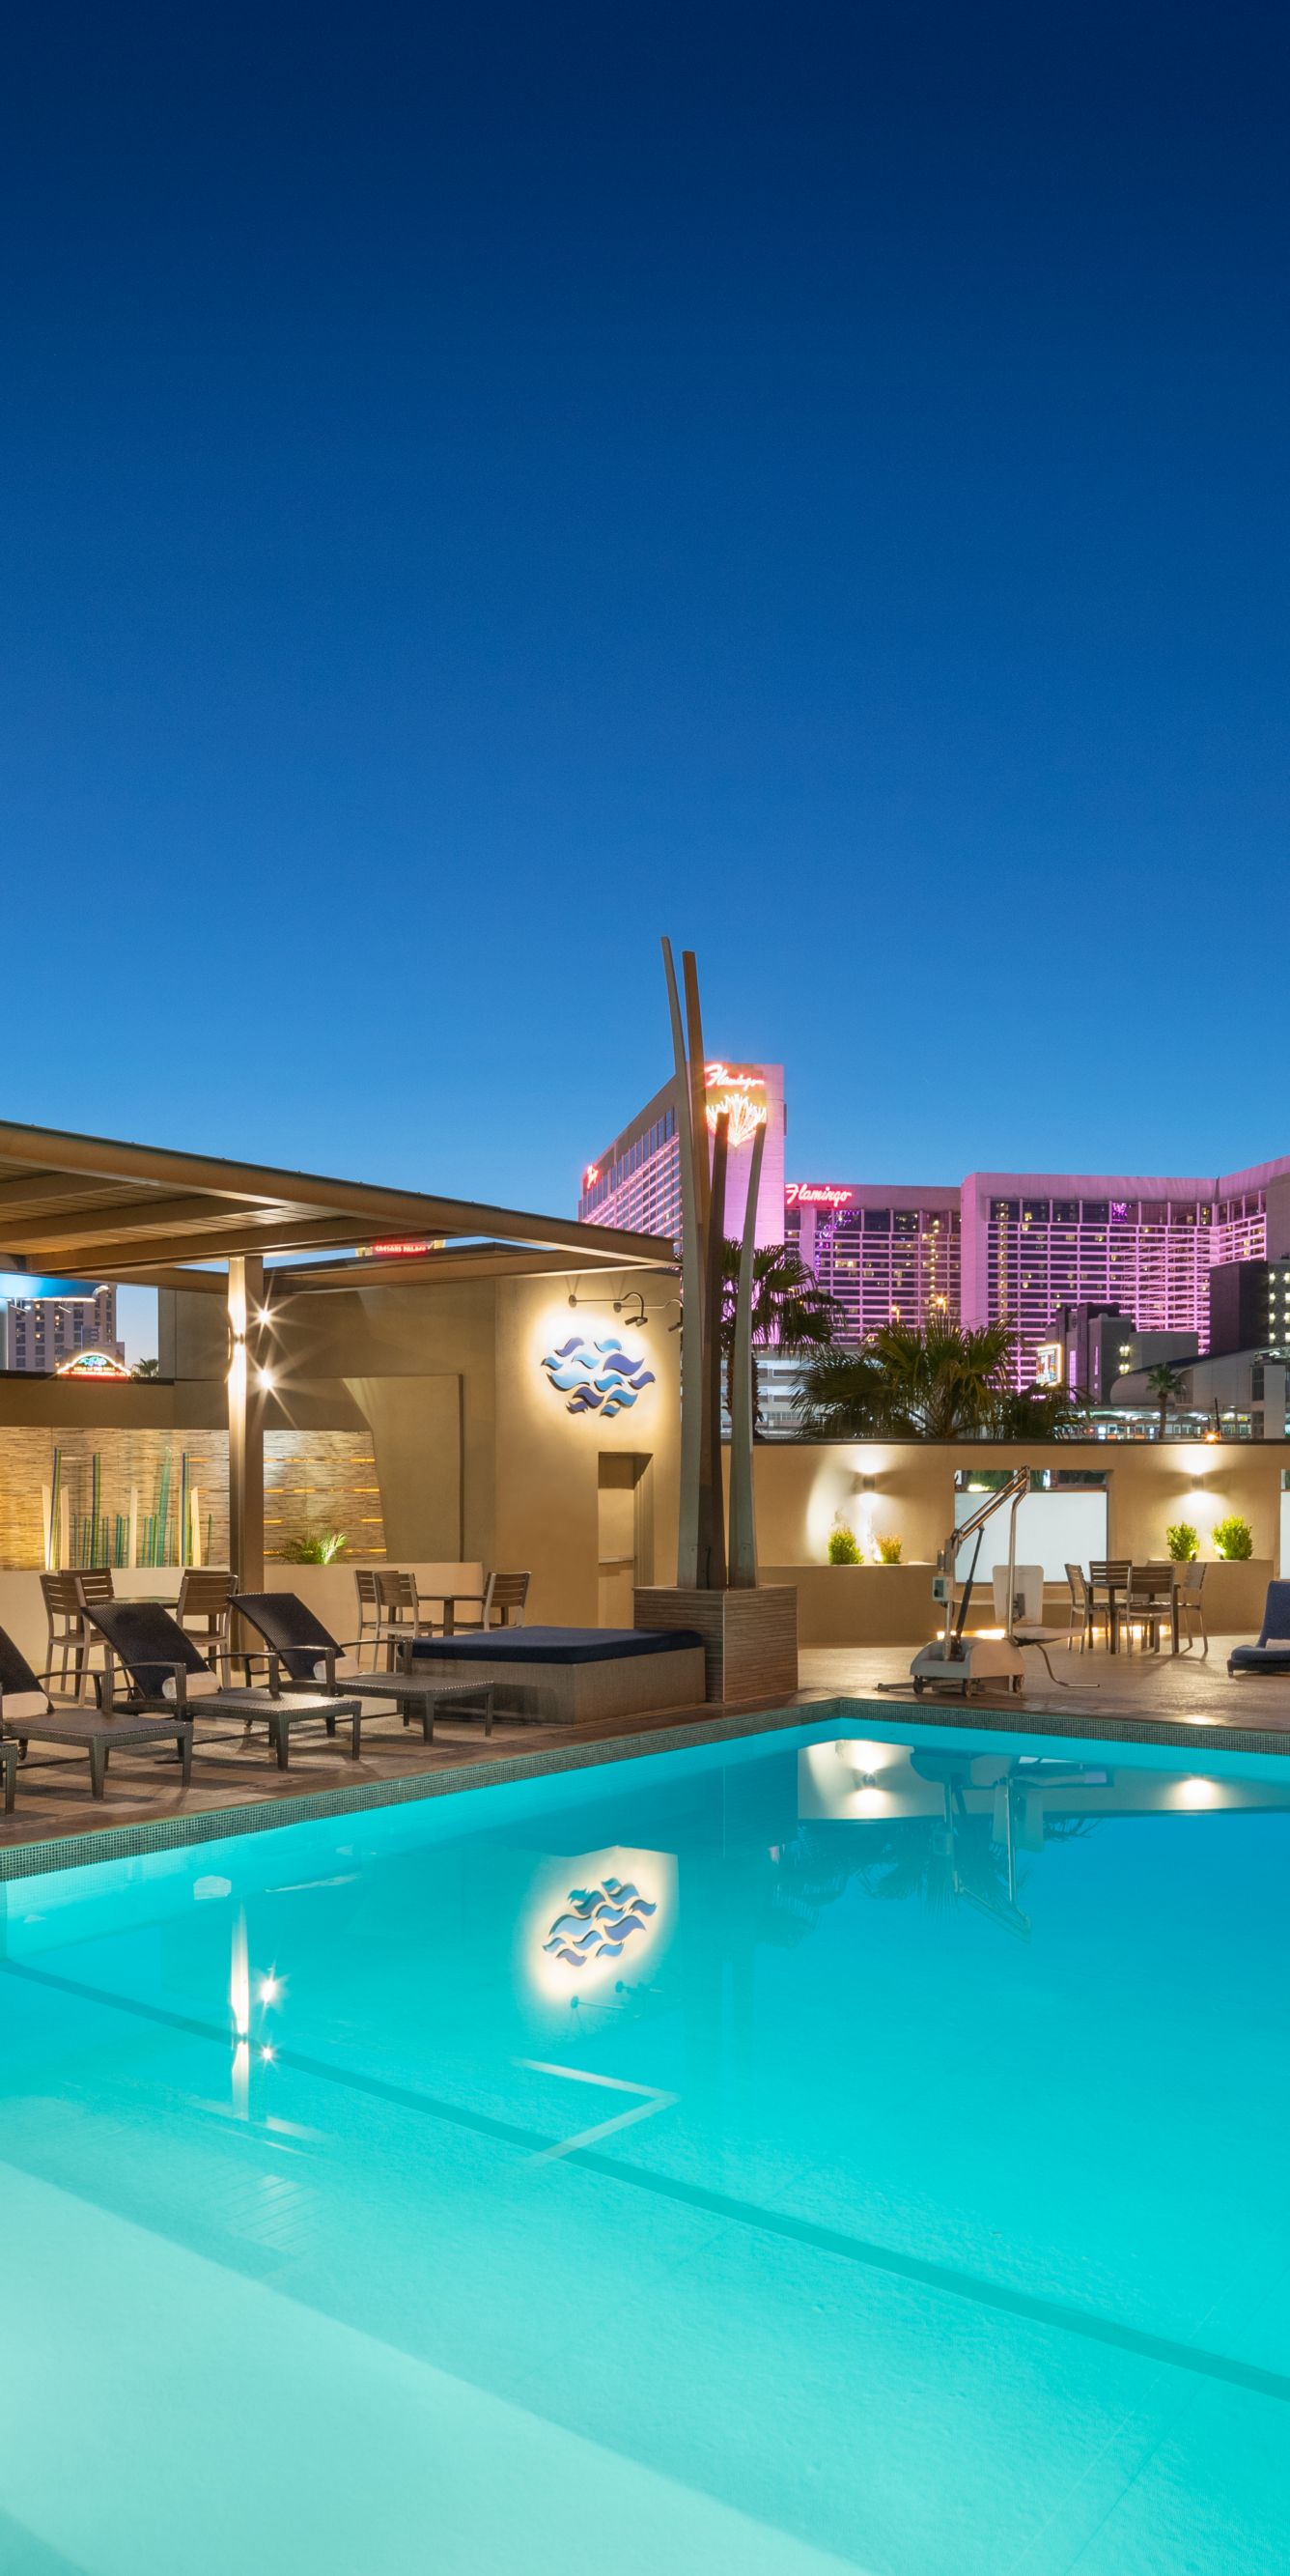 Las Vegas Marriott Review: What To REALLY Expect If You Stay